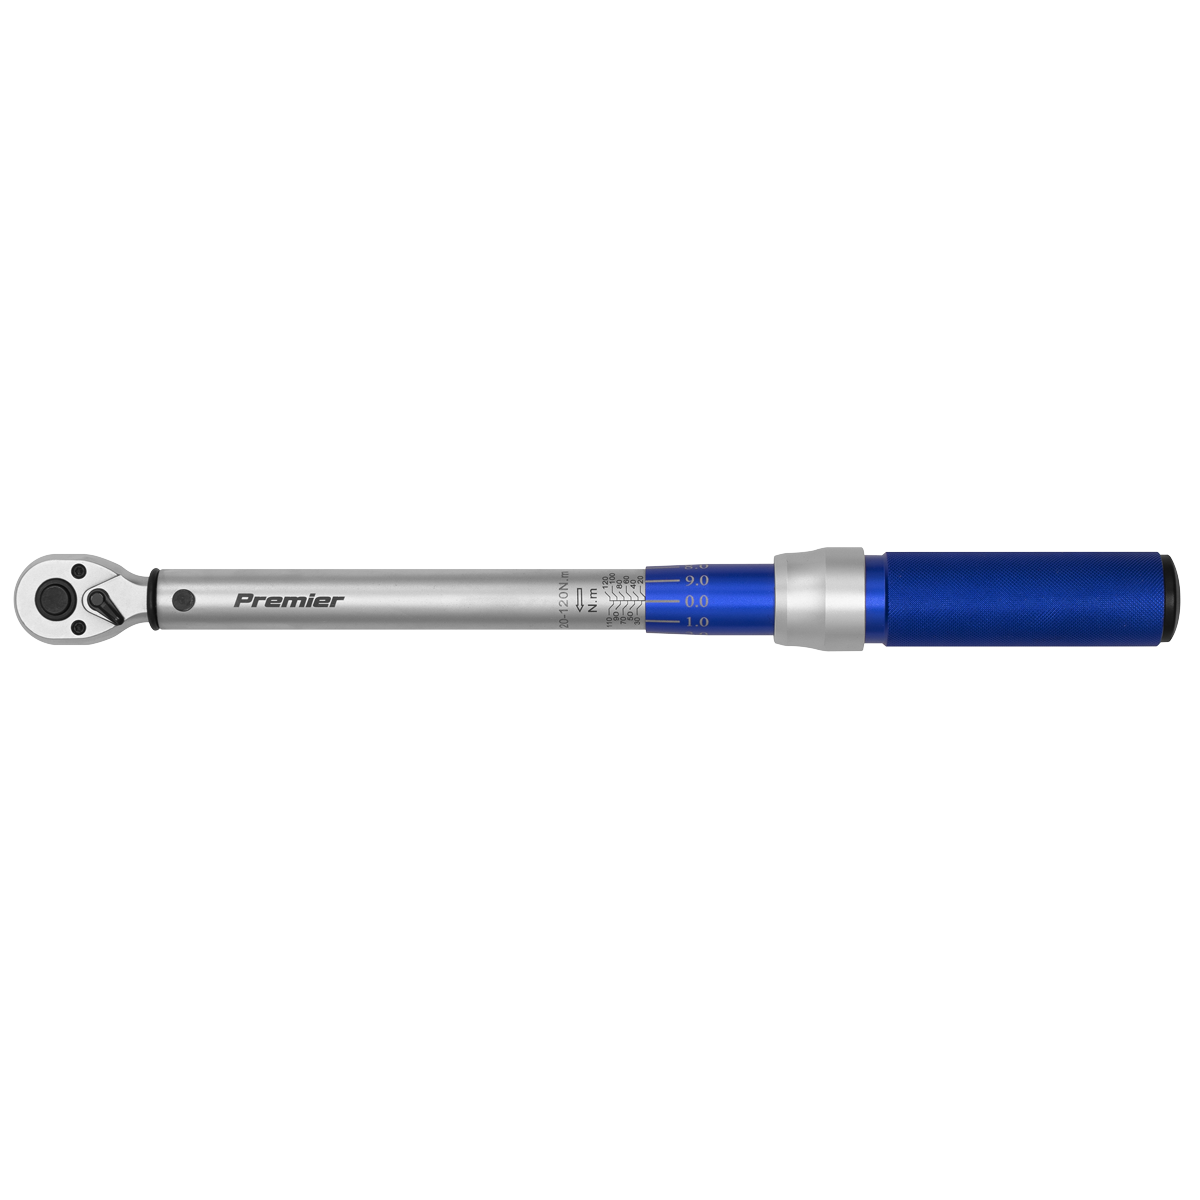 Torque Wrench Micrometer Style 3/8"Sq Drive 20-120Nm - Calibrated